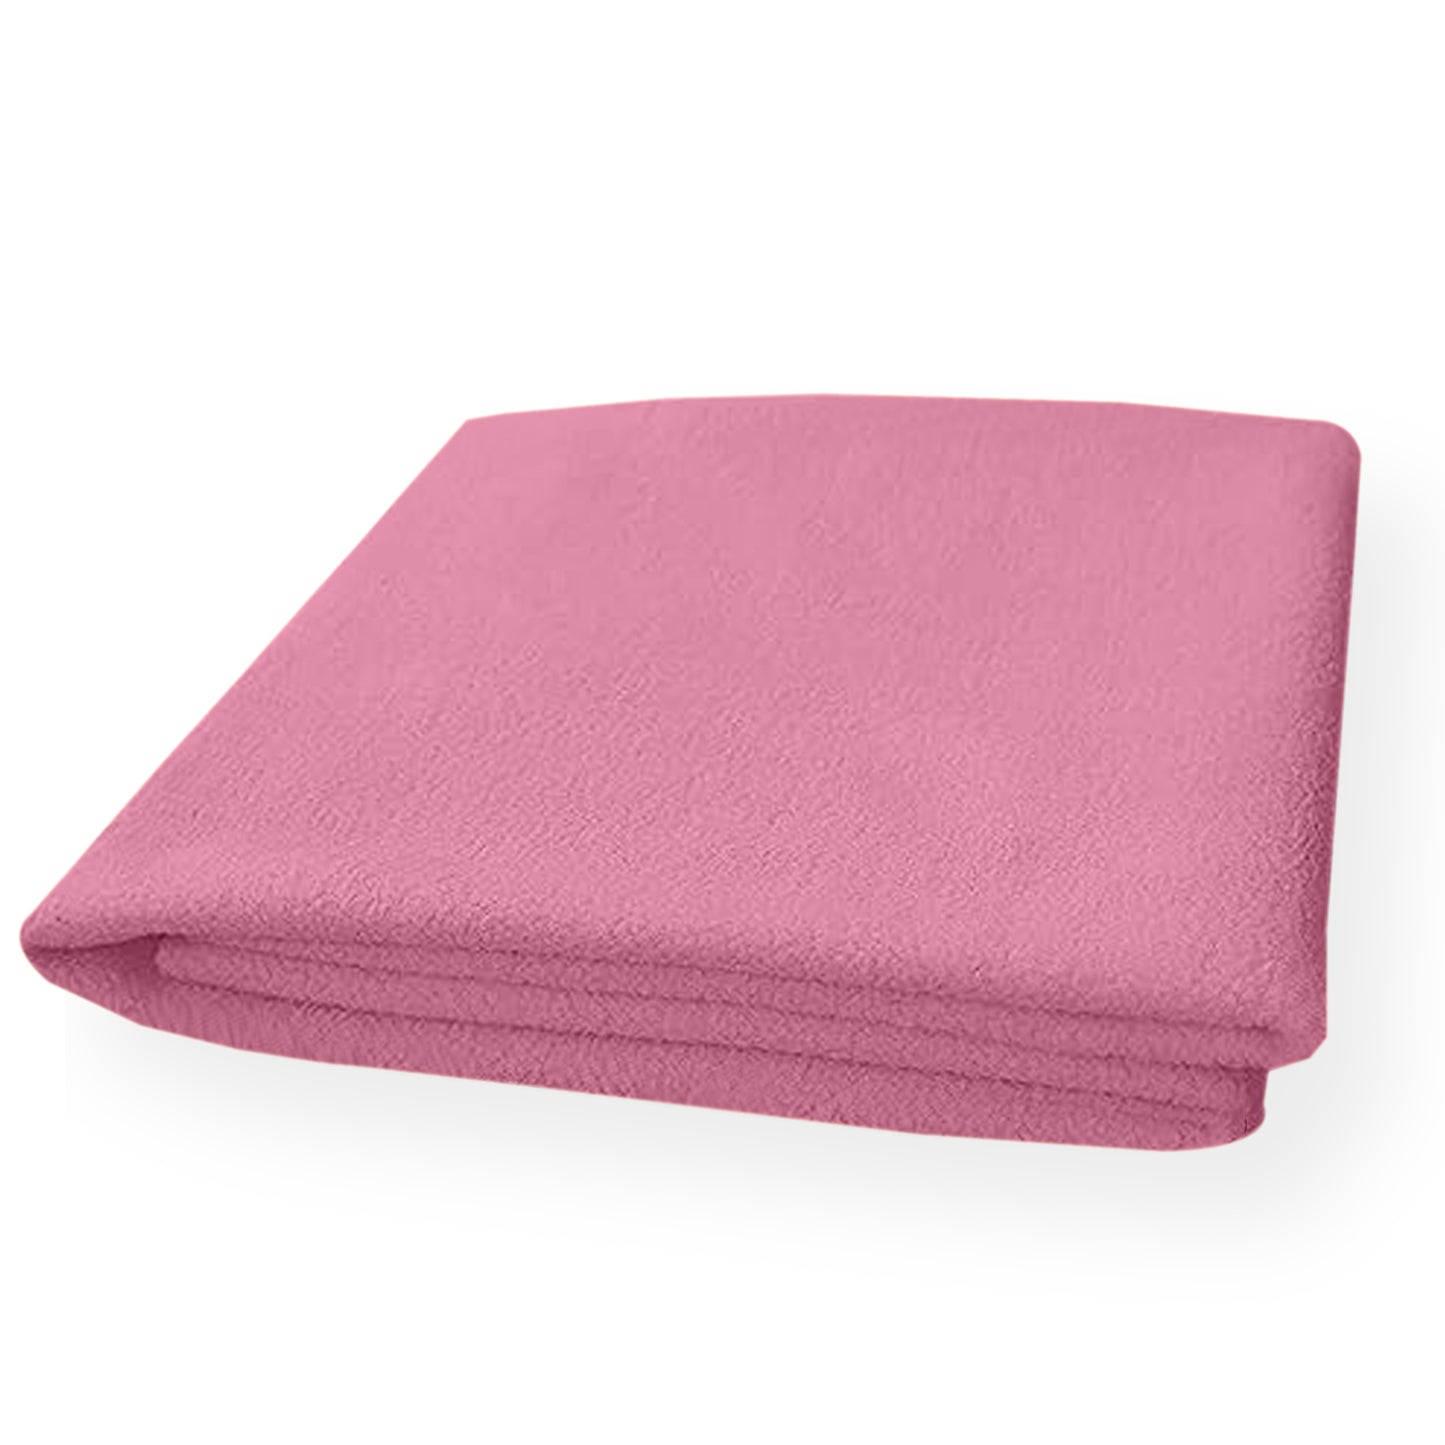 Waterproof Bed Protector, Quick Dry Sheet, Baby Bed Protector (70 X 100 CM), Pack of 1 -PINK